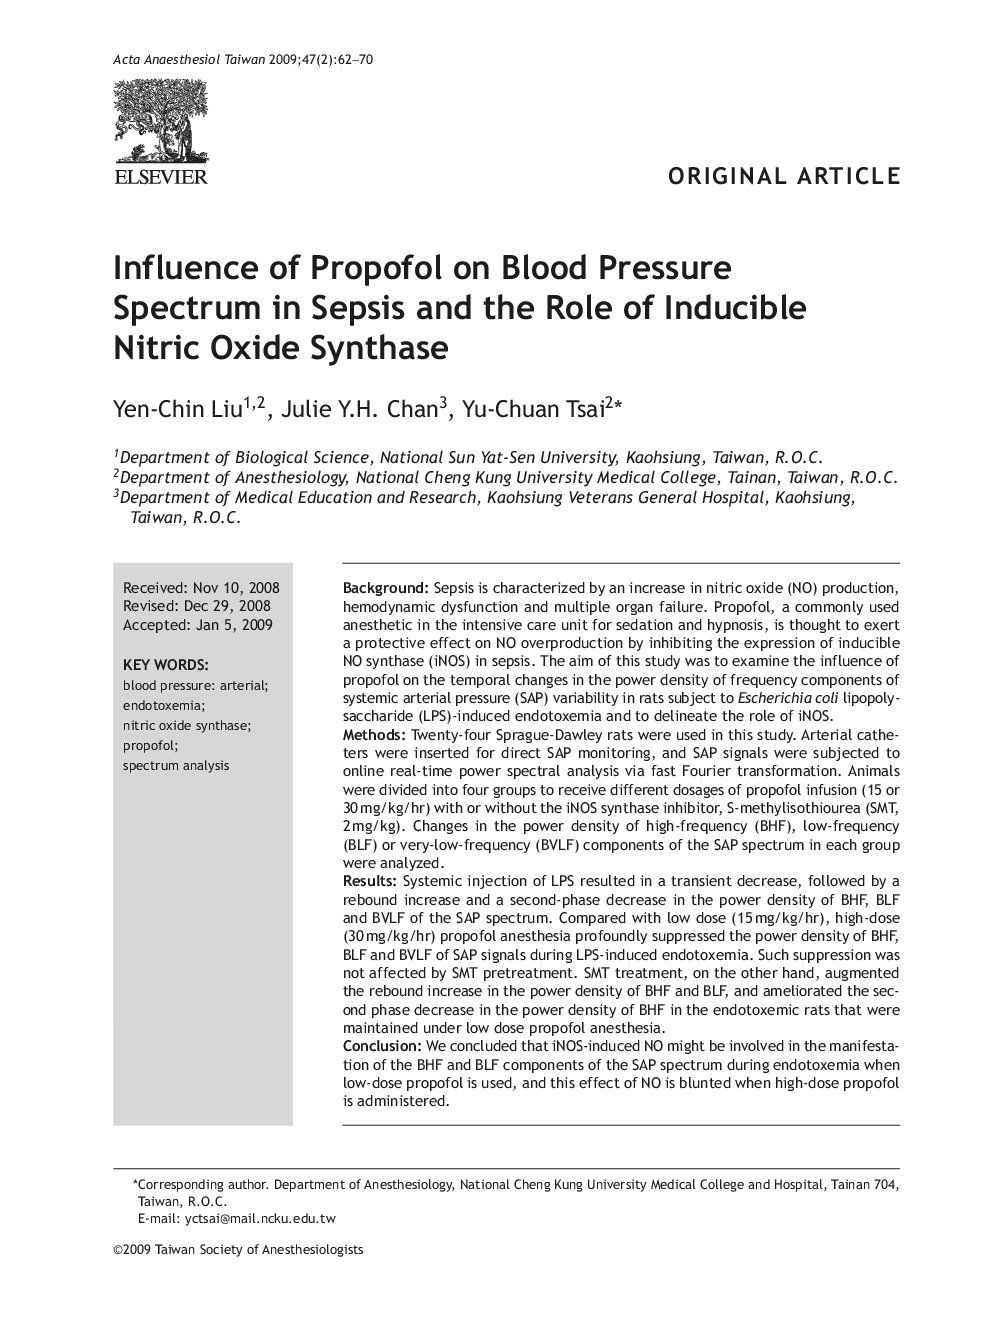 Influence of Propofol on Blood Pressure Spectrum in Sepsis and the Role of Inducible Nitric Oxide Synthase